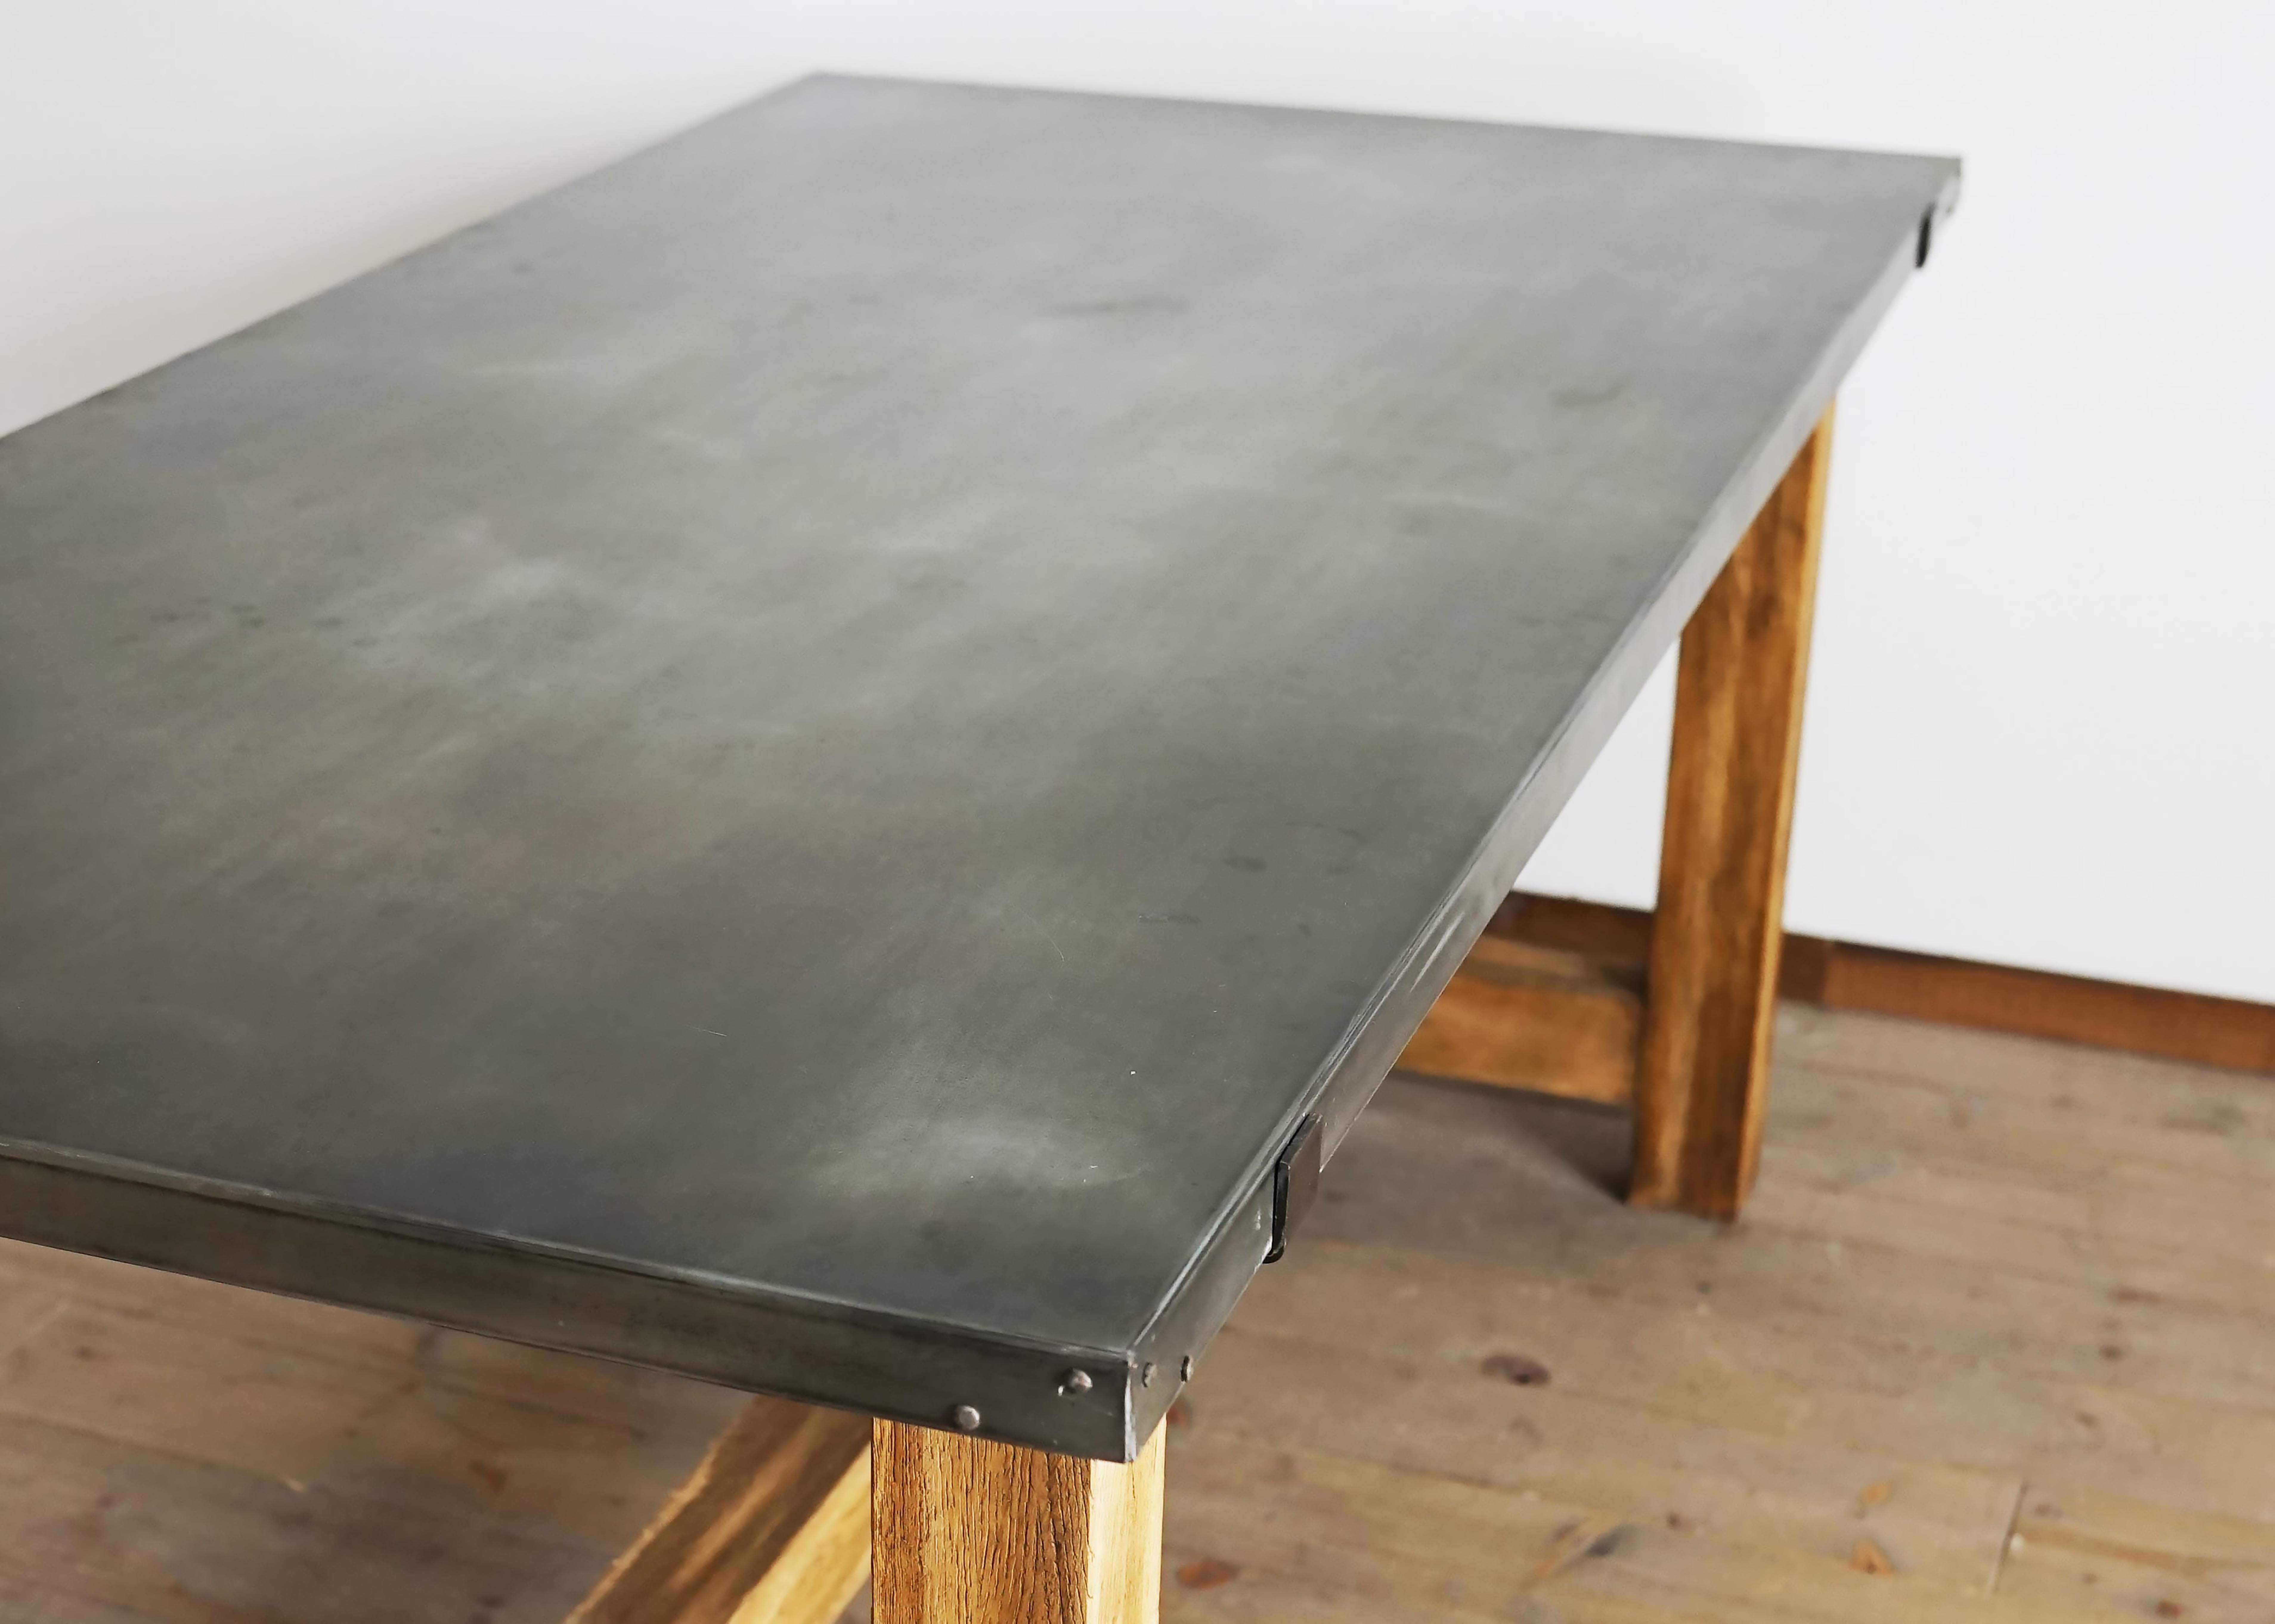 Japanese Rugged Table